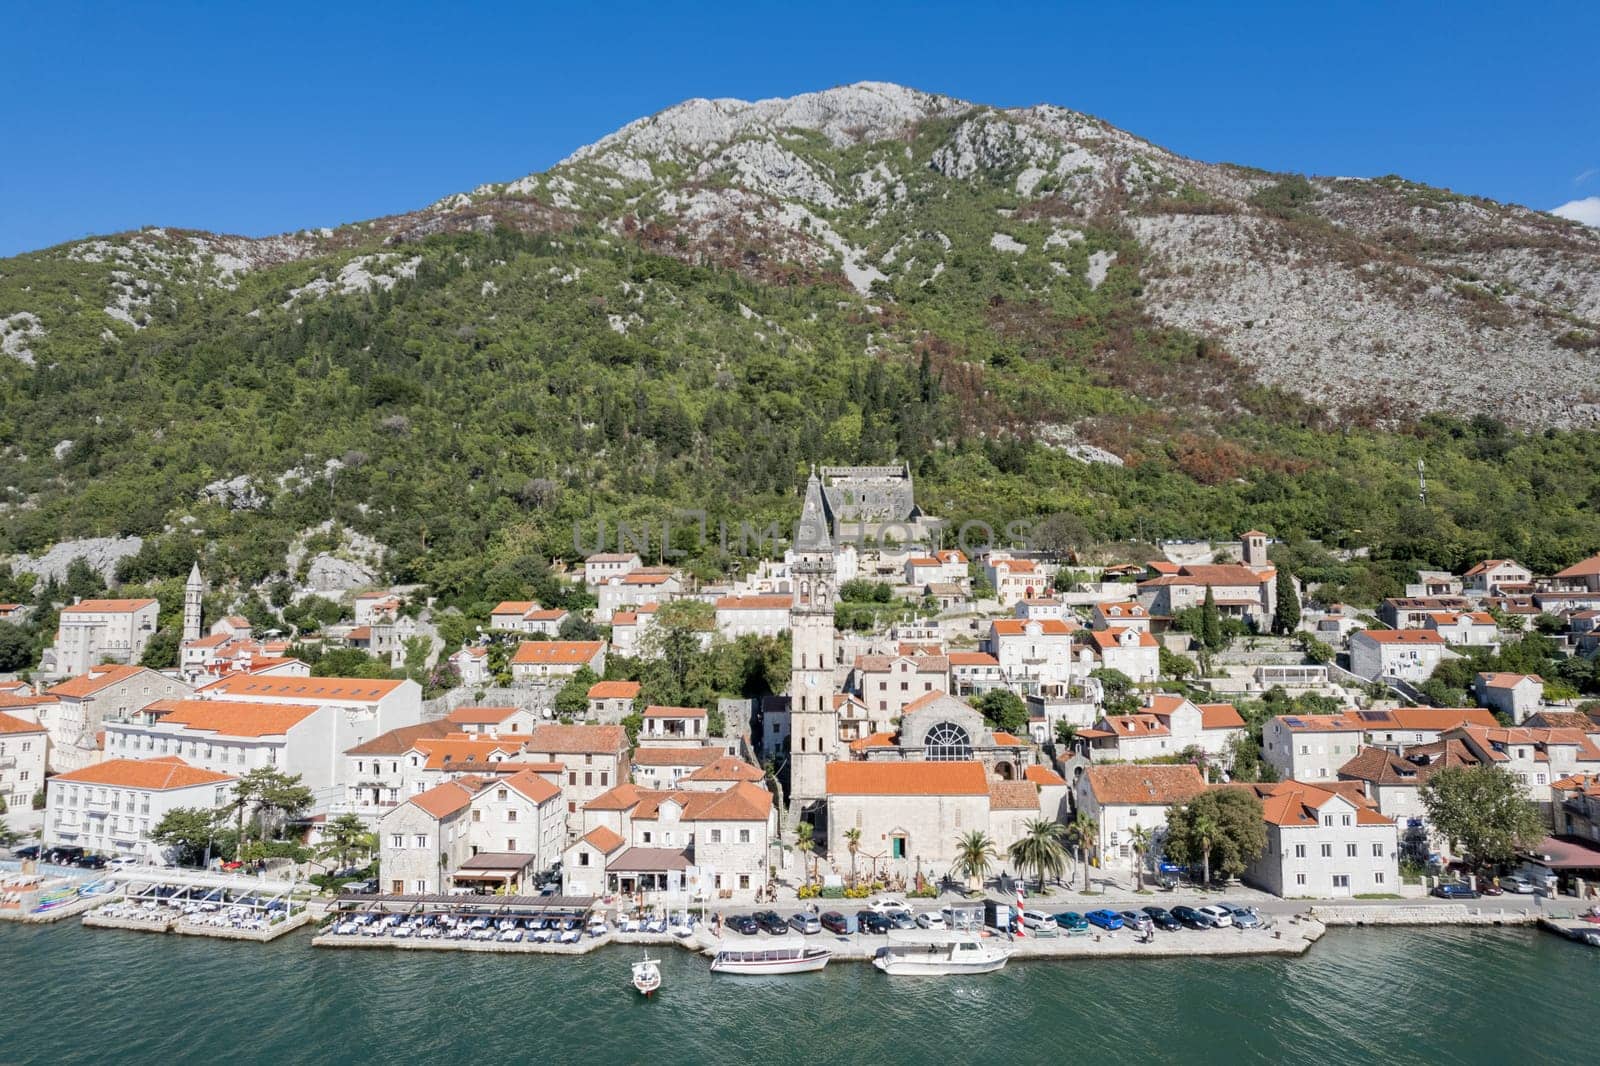 Motor boats stand off the coast of Perast against the backdrop of the Church of St. Nicholas and ancient houses. Montenegro by Nadtochiy